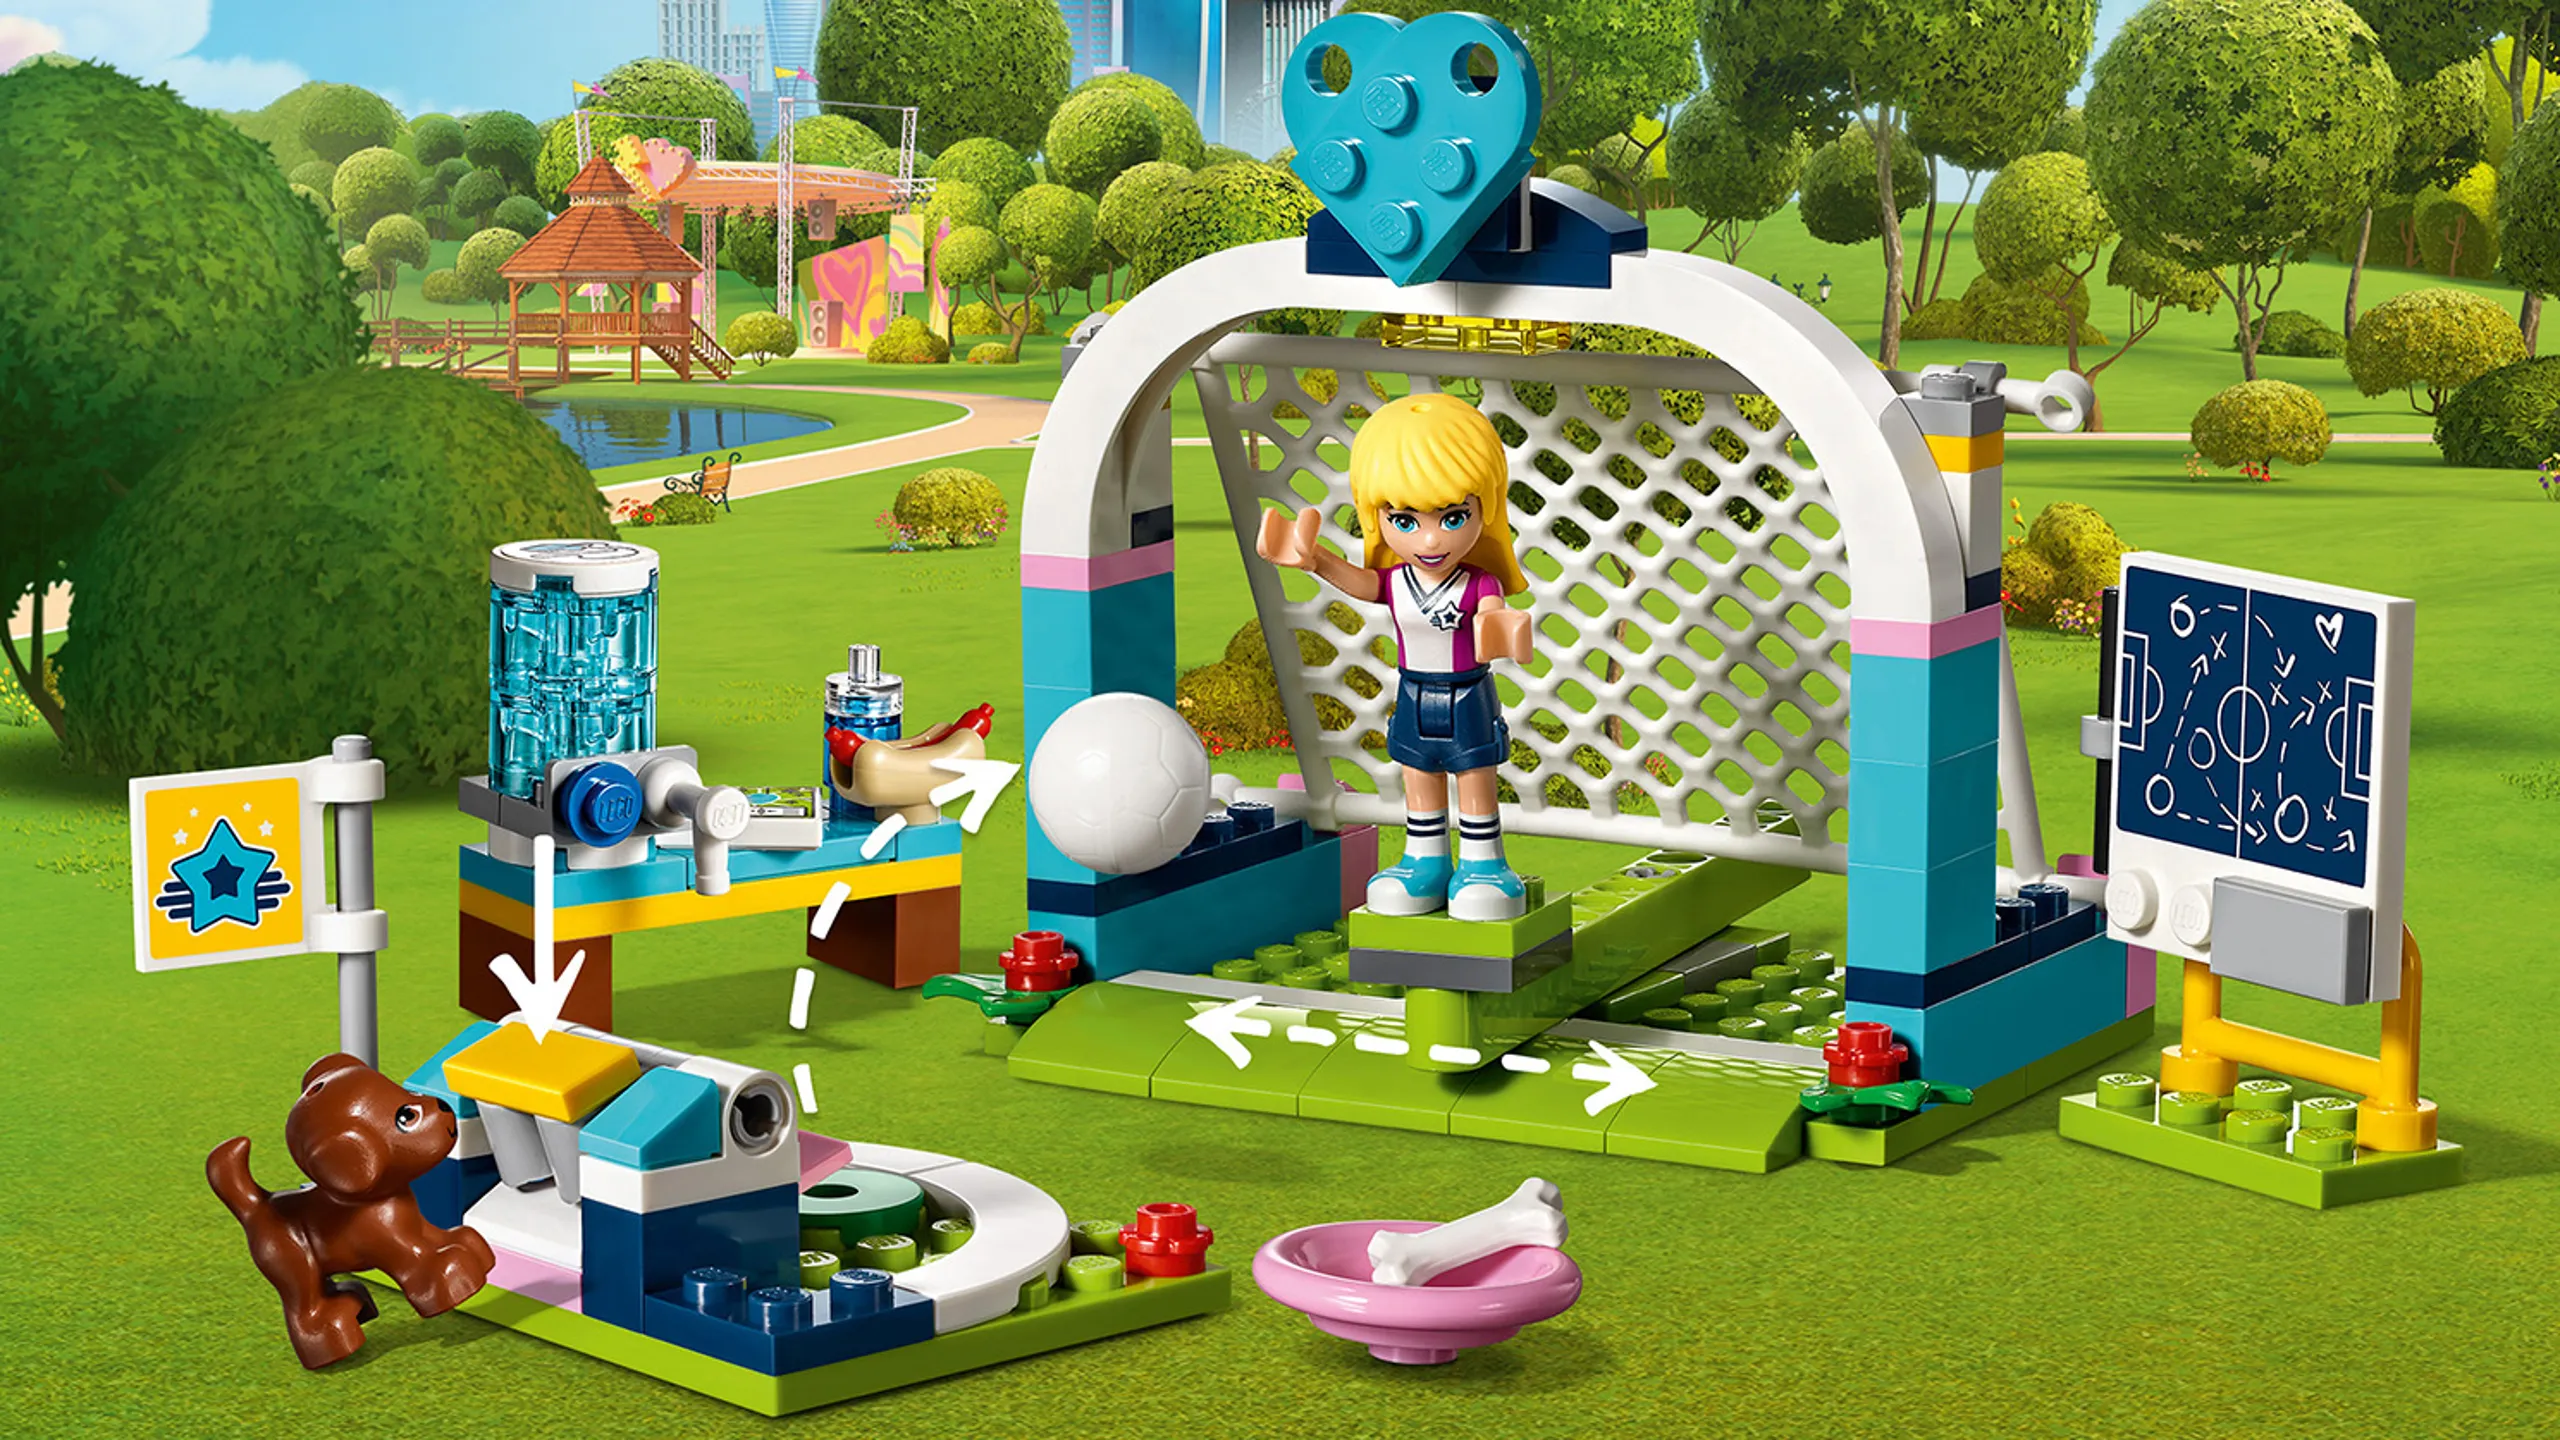 LEGO Friends Stephanie's Soccer Practice - 41330 - Train with Stephanie at her Football Practice in Heartlake City Park and use the shoot function to launch the ball toward the goal. Help puppy Dash fetch the ball!